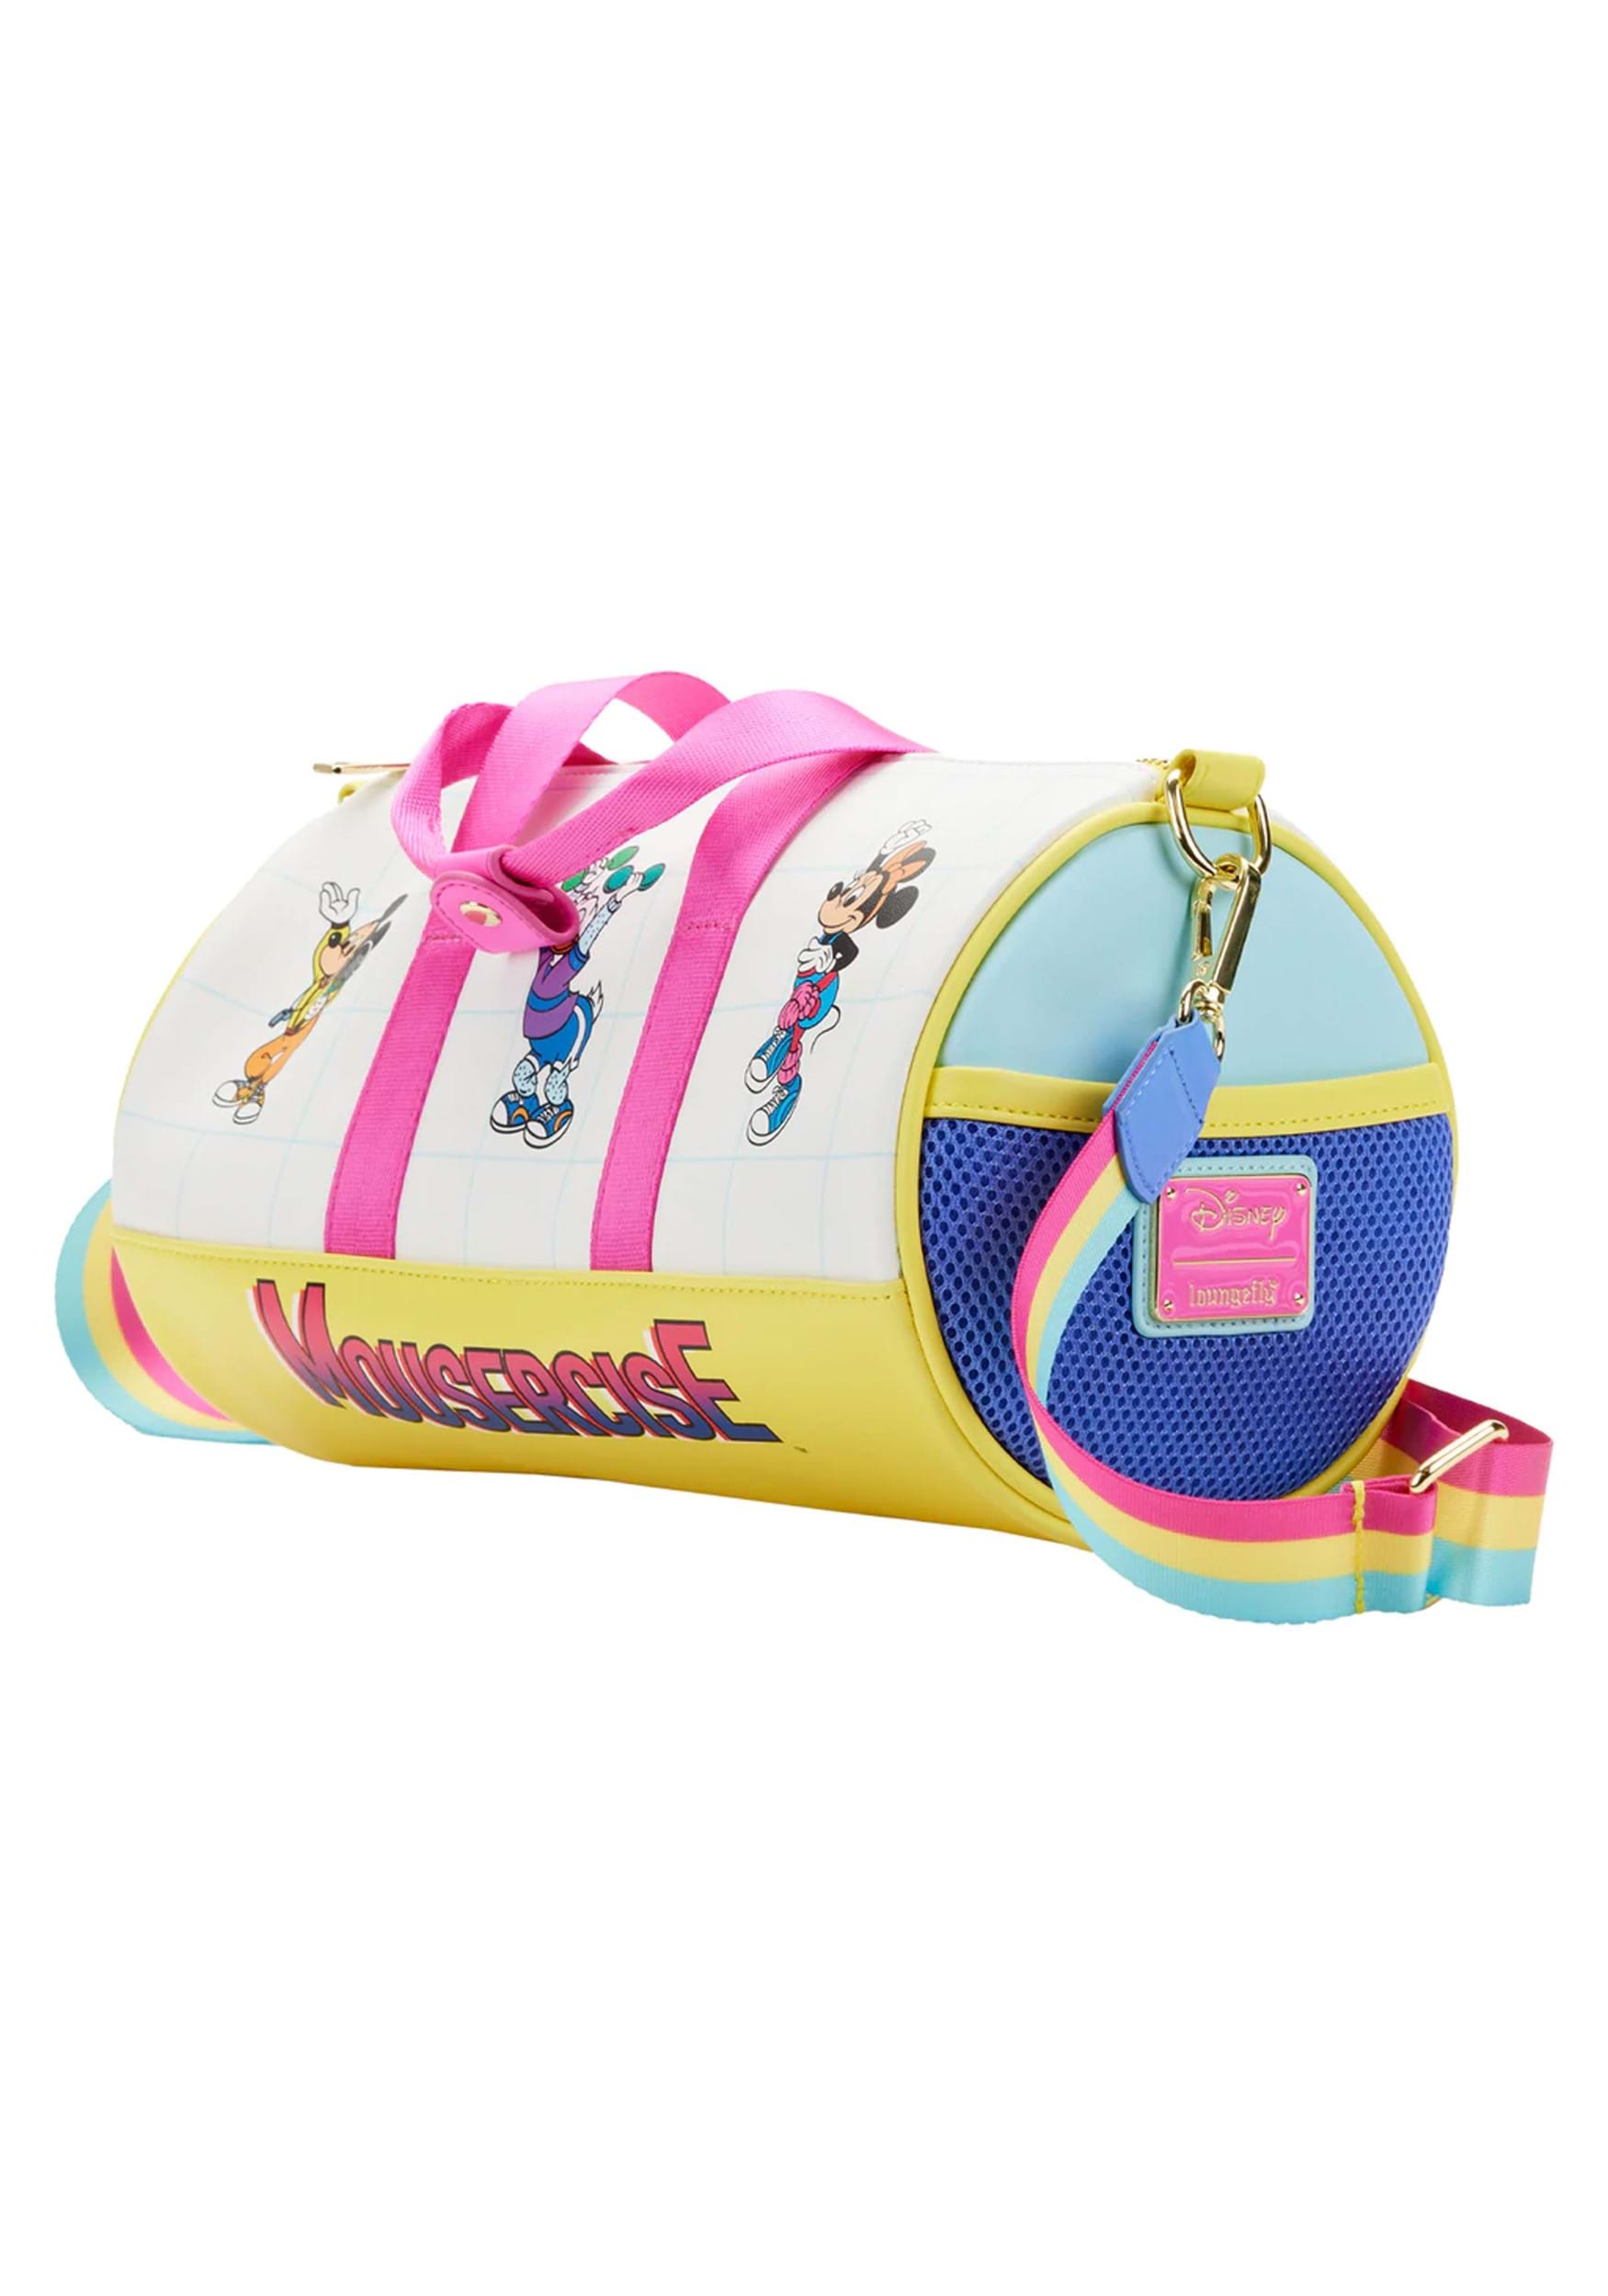 Disney Mickey Mouse Duffle Bag : : Clothing, Shoes & Accessories